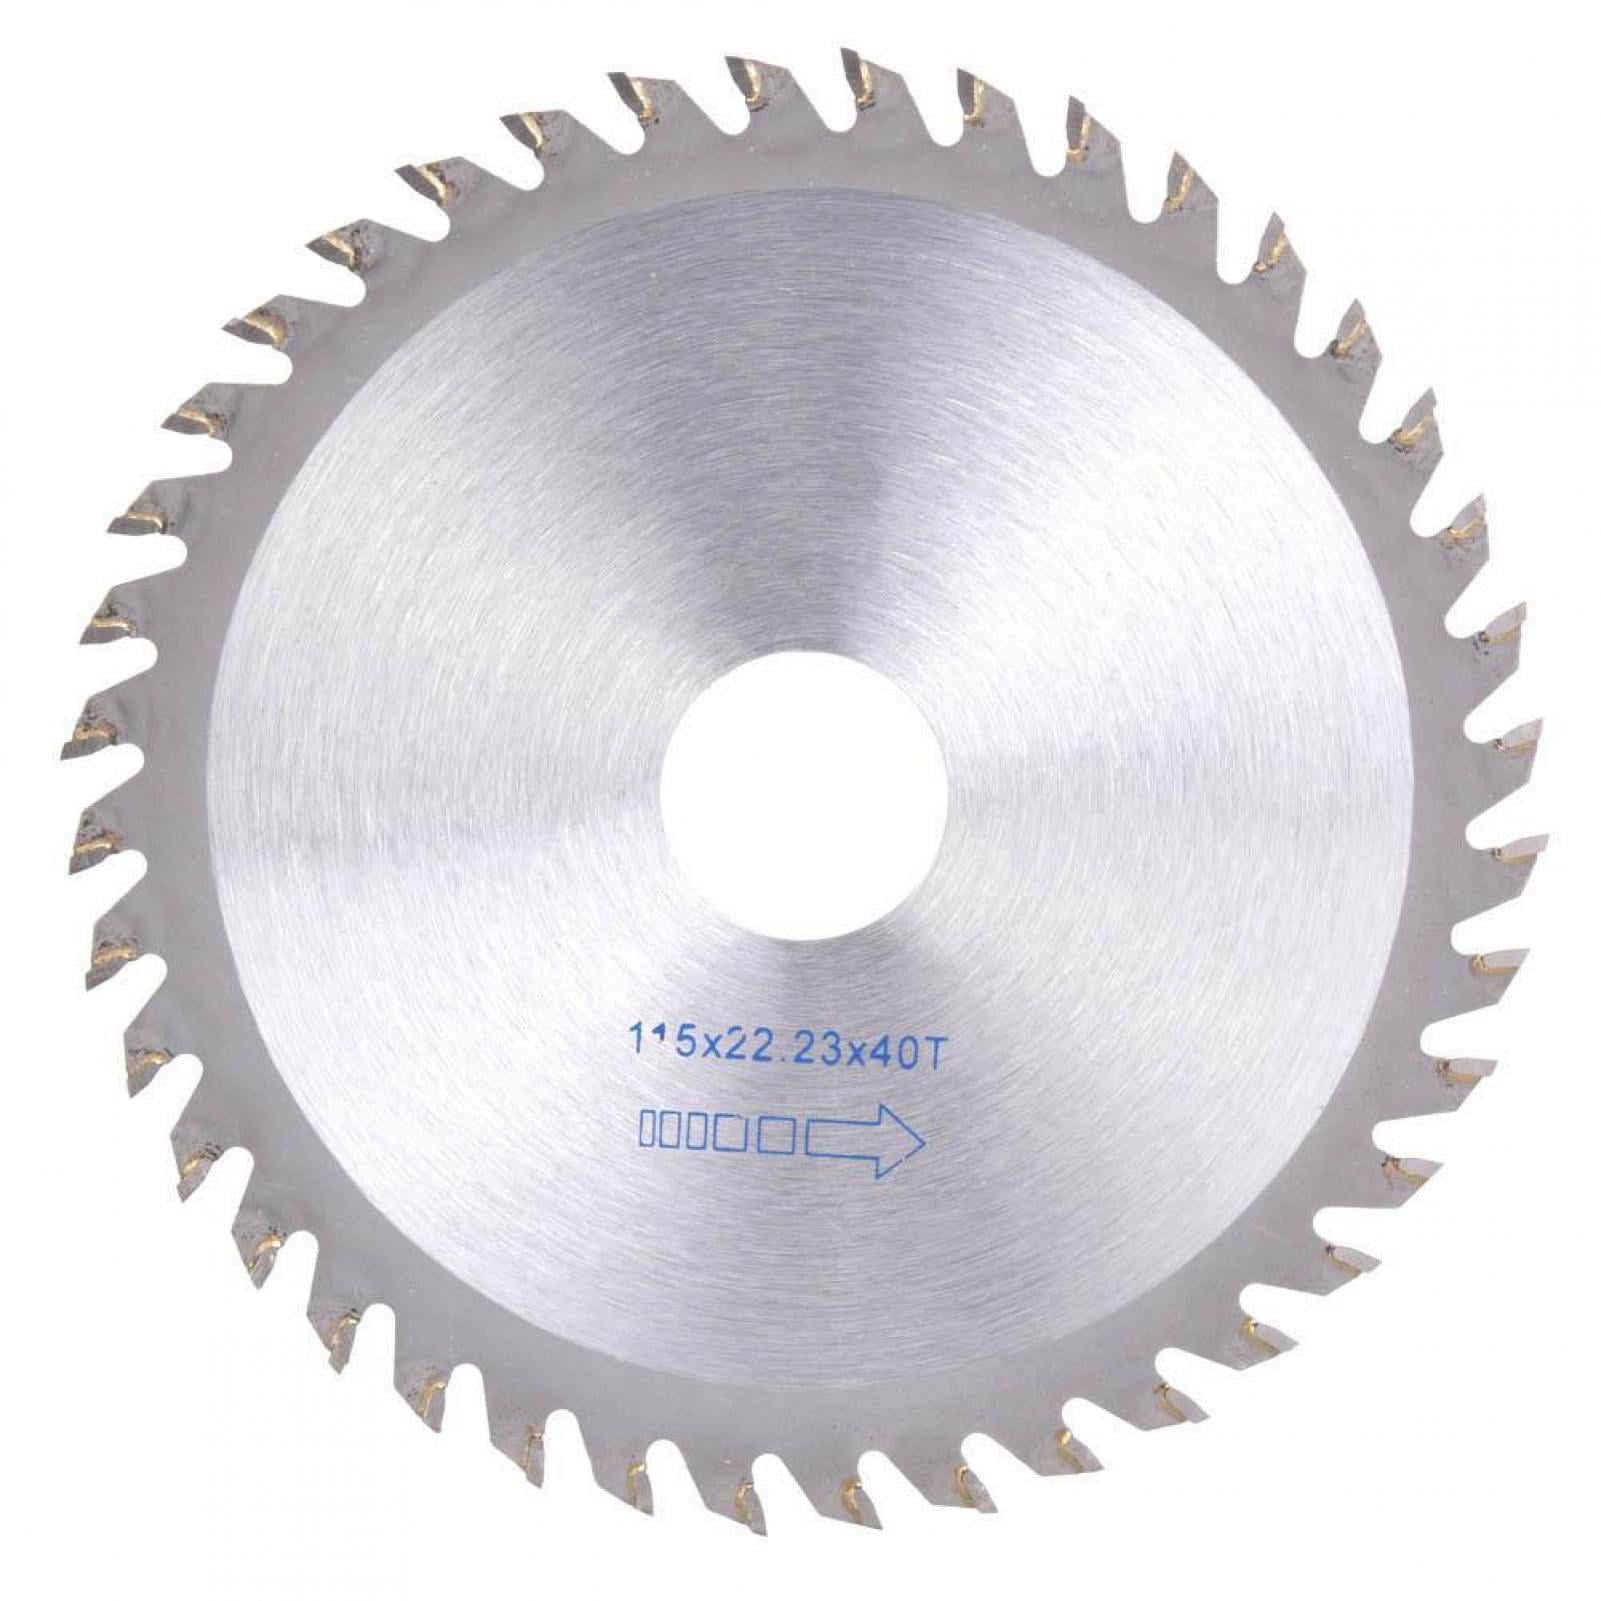 Angle Grinders Saw Blades SET 115x22 pack of 2 for Wood Cutting Disc Circular